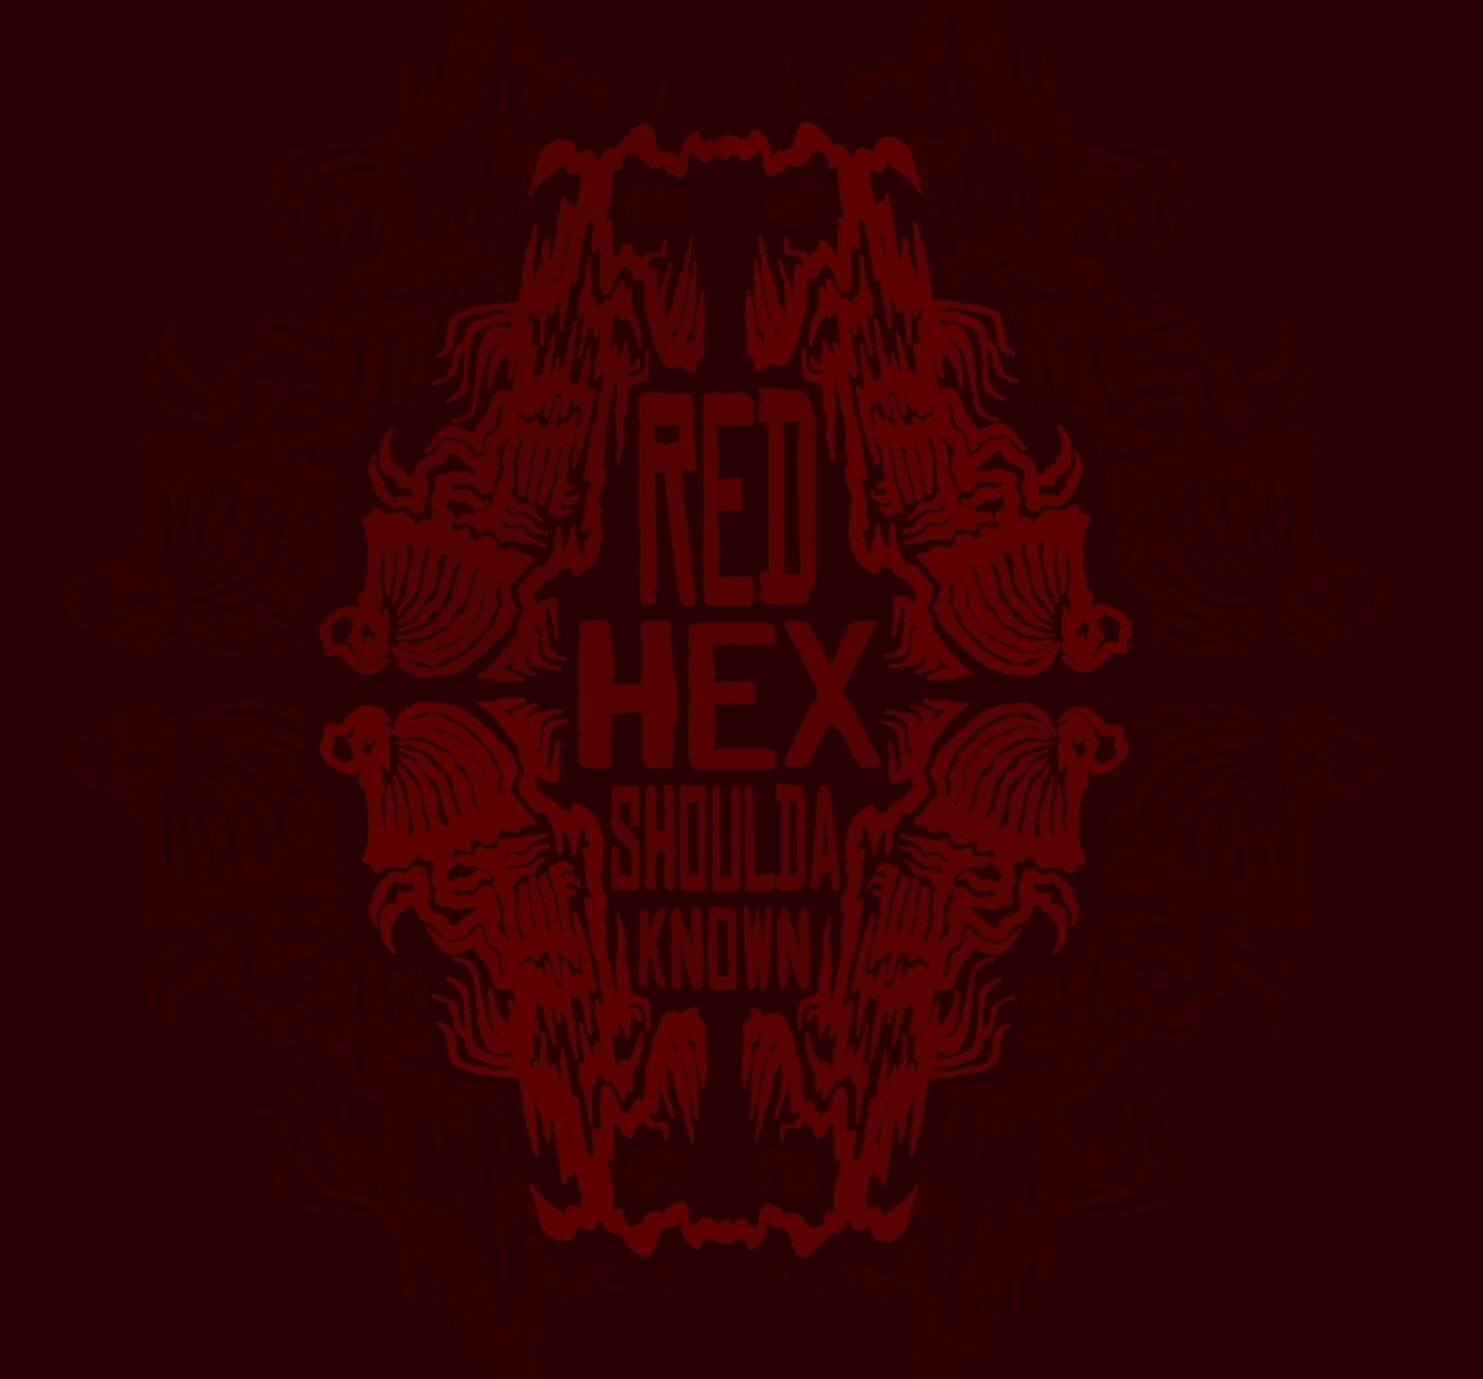 Red Hex - Shoulda Known 7"